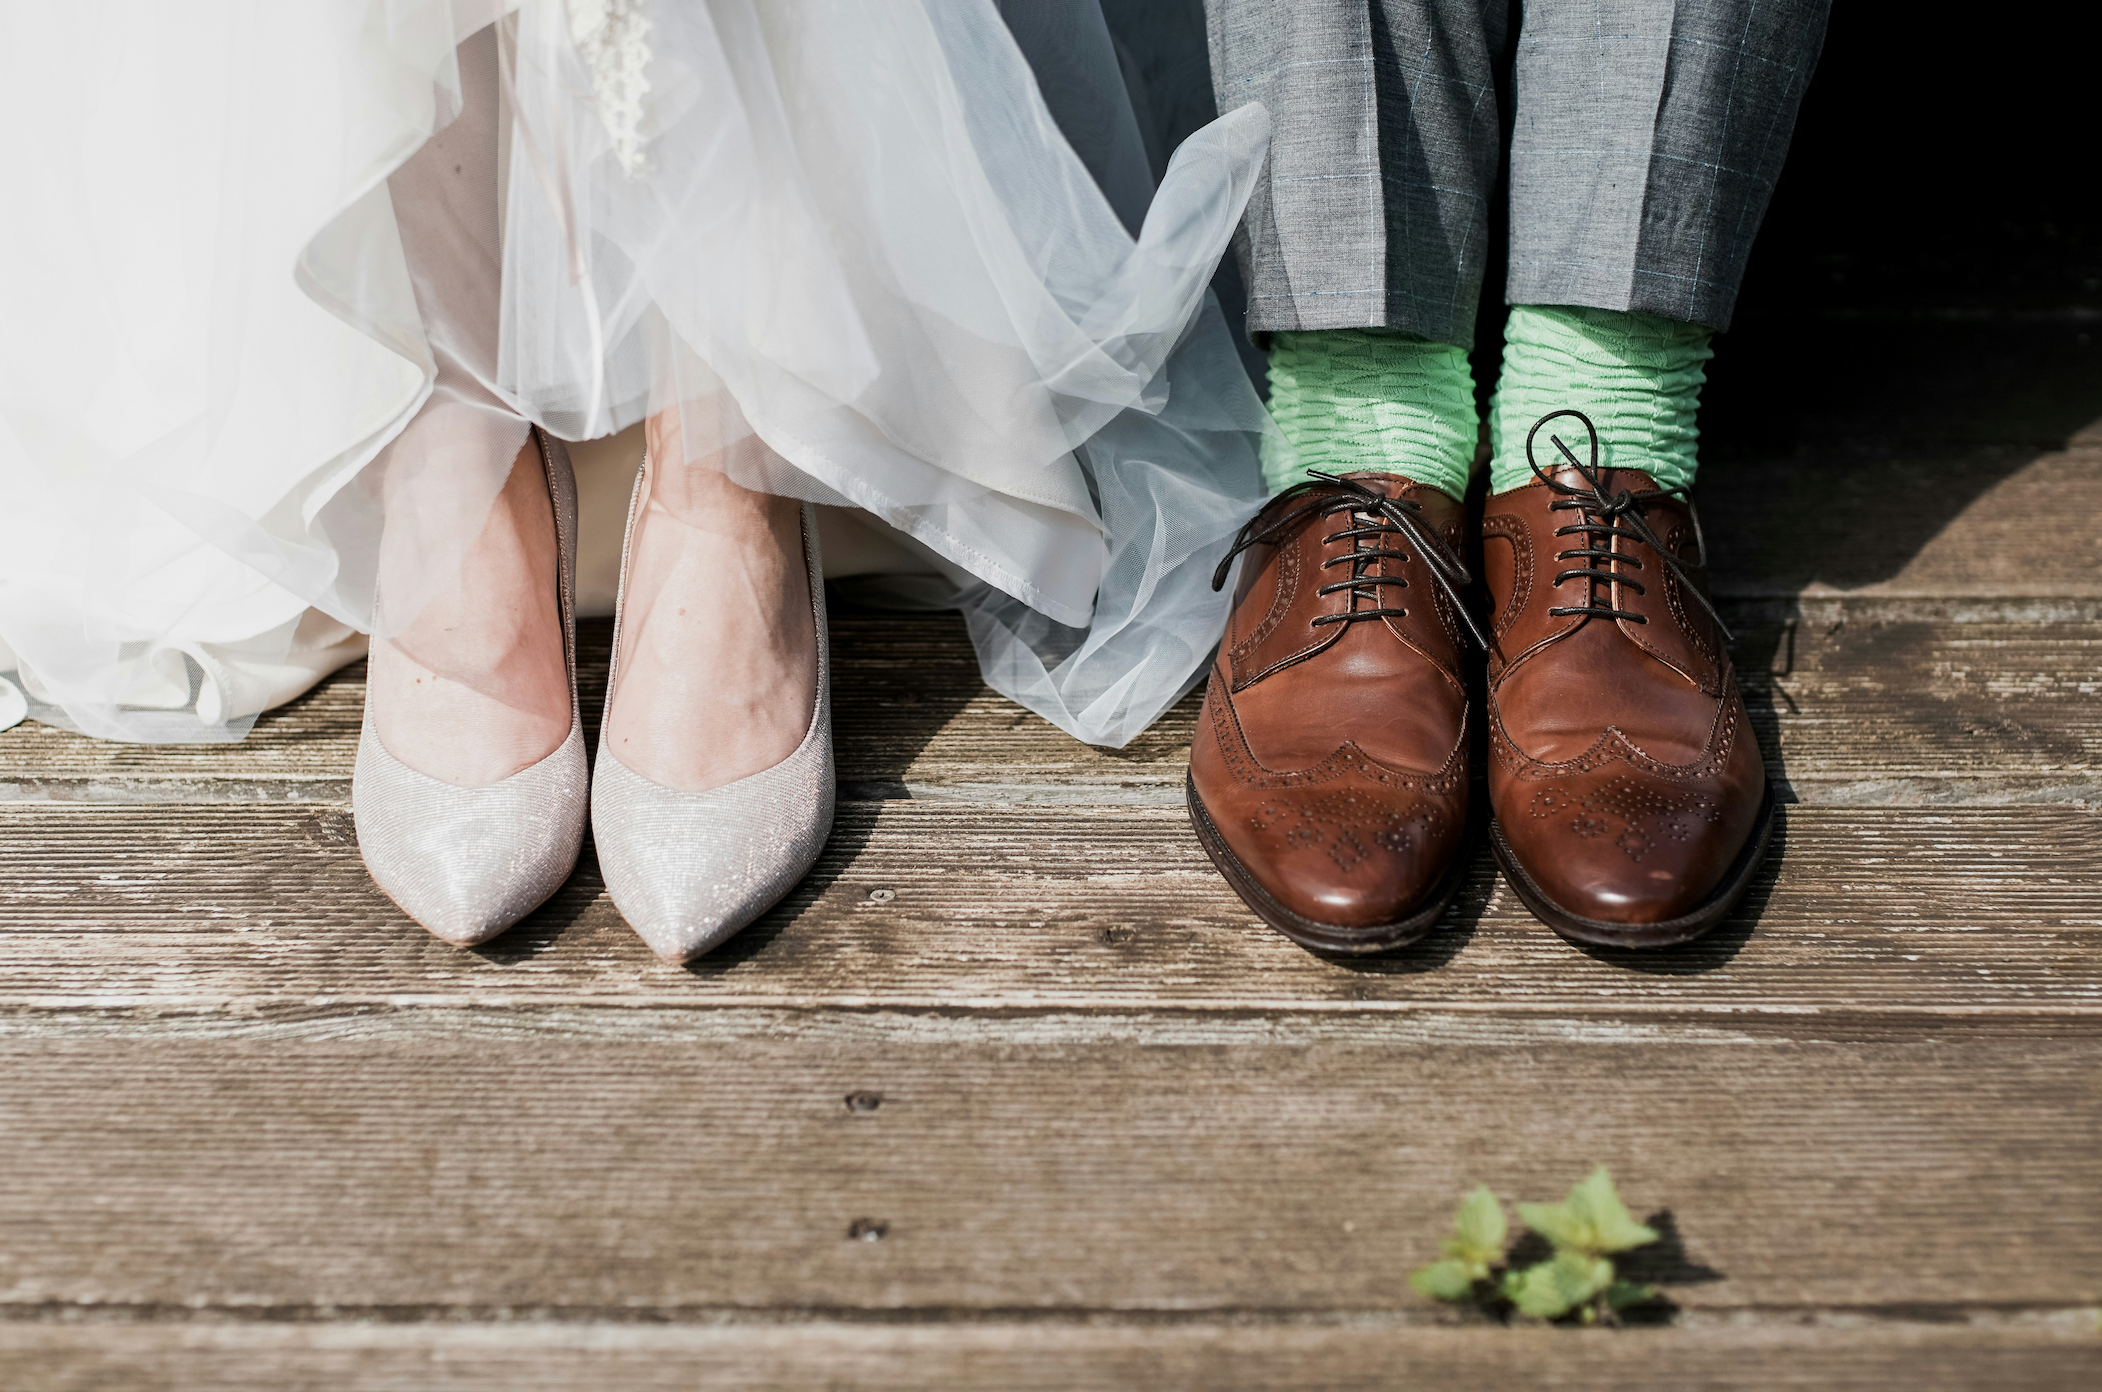 Bride and groom's shoes next to each other